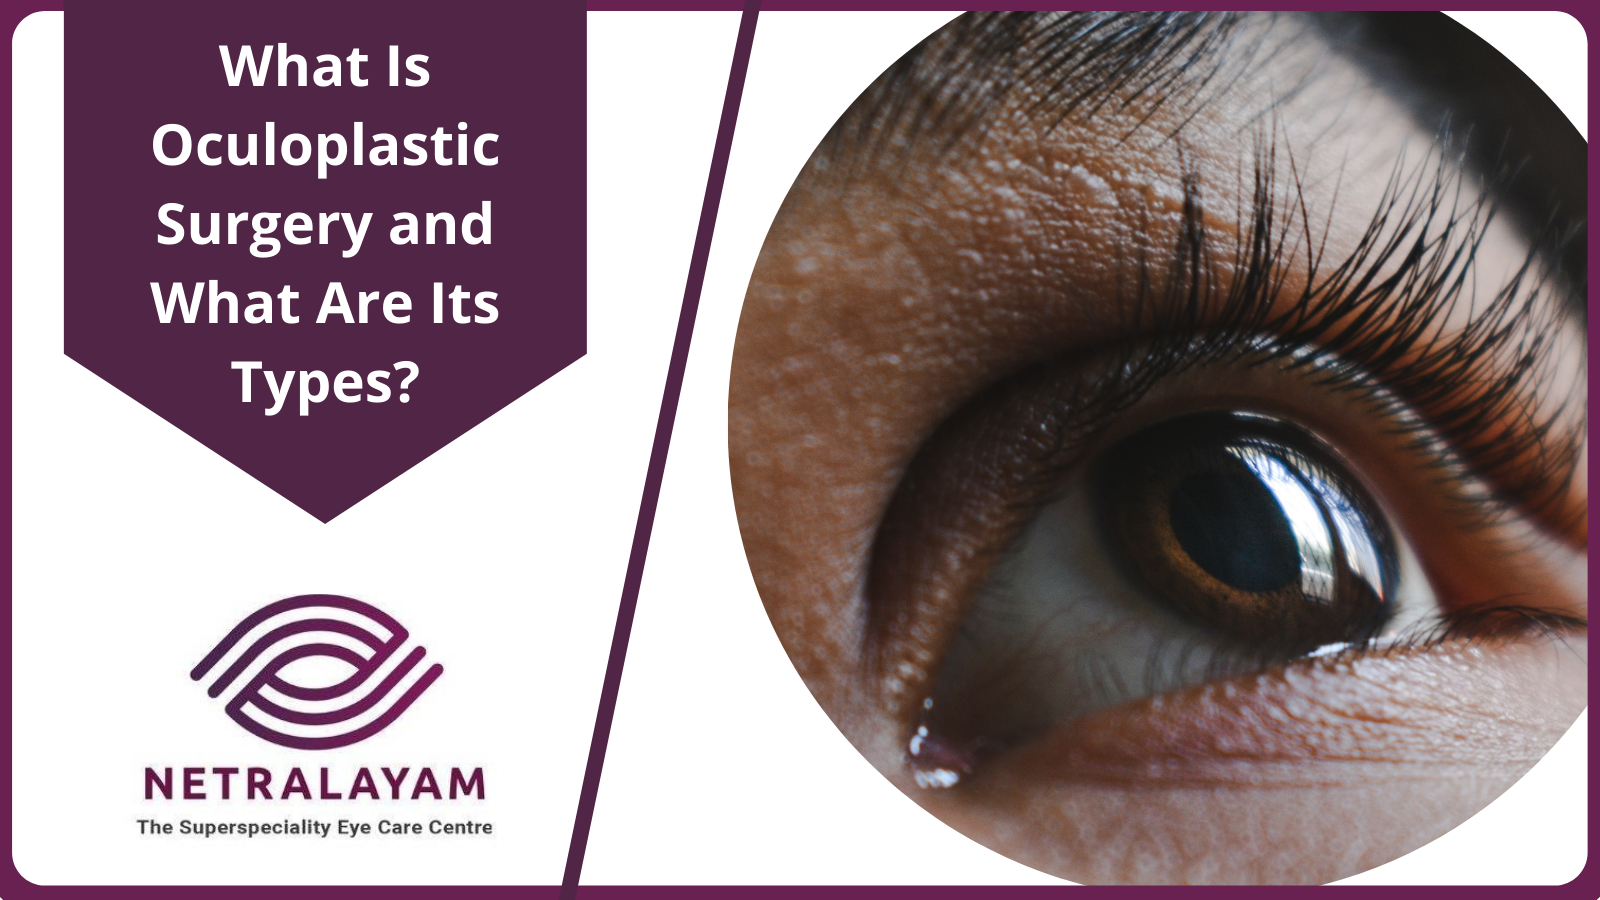 What Is Oculoplastic Surgery and What Are Its Types?